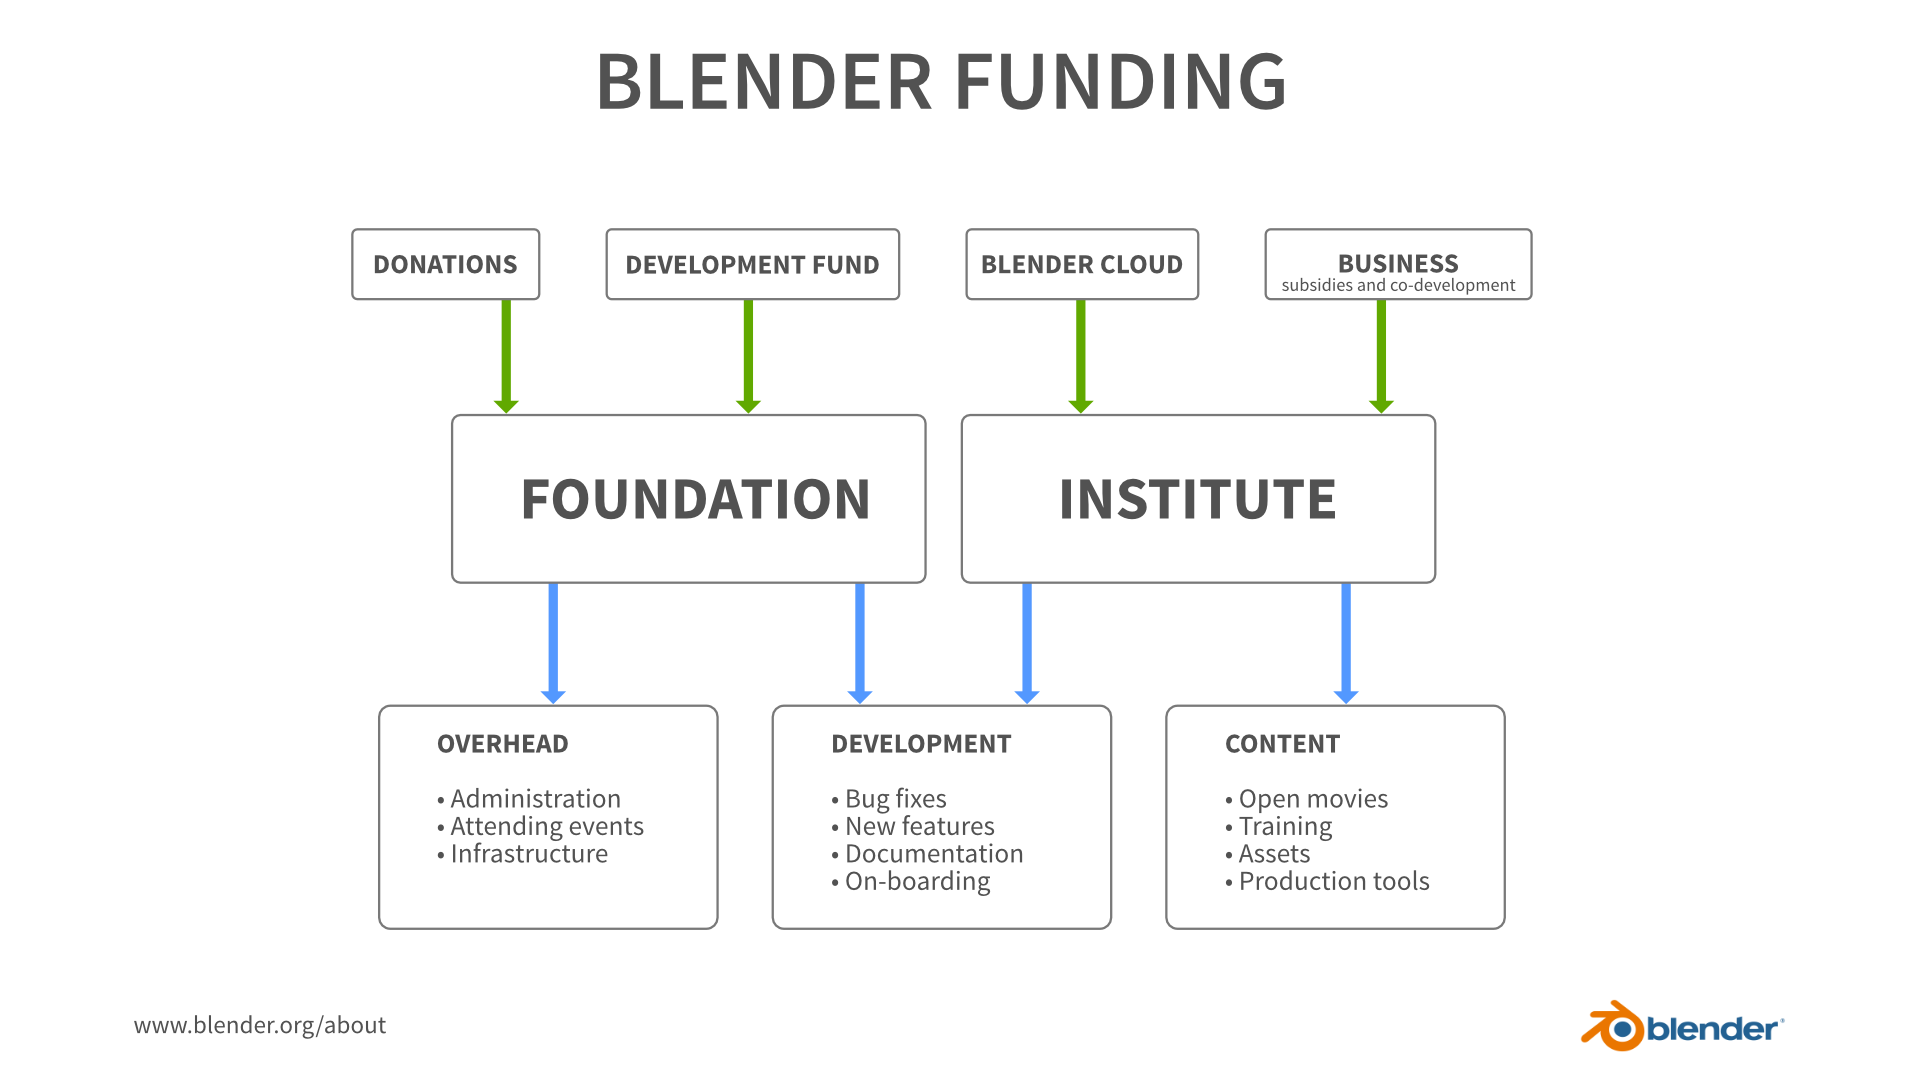 Blender financial and organizational structure.